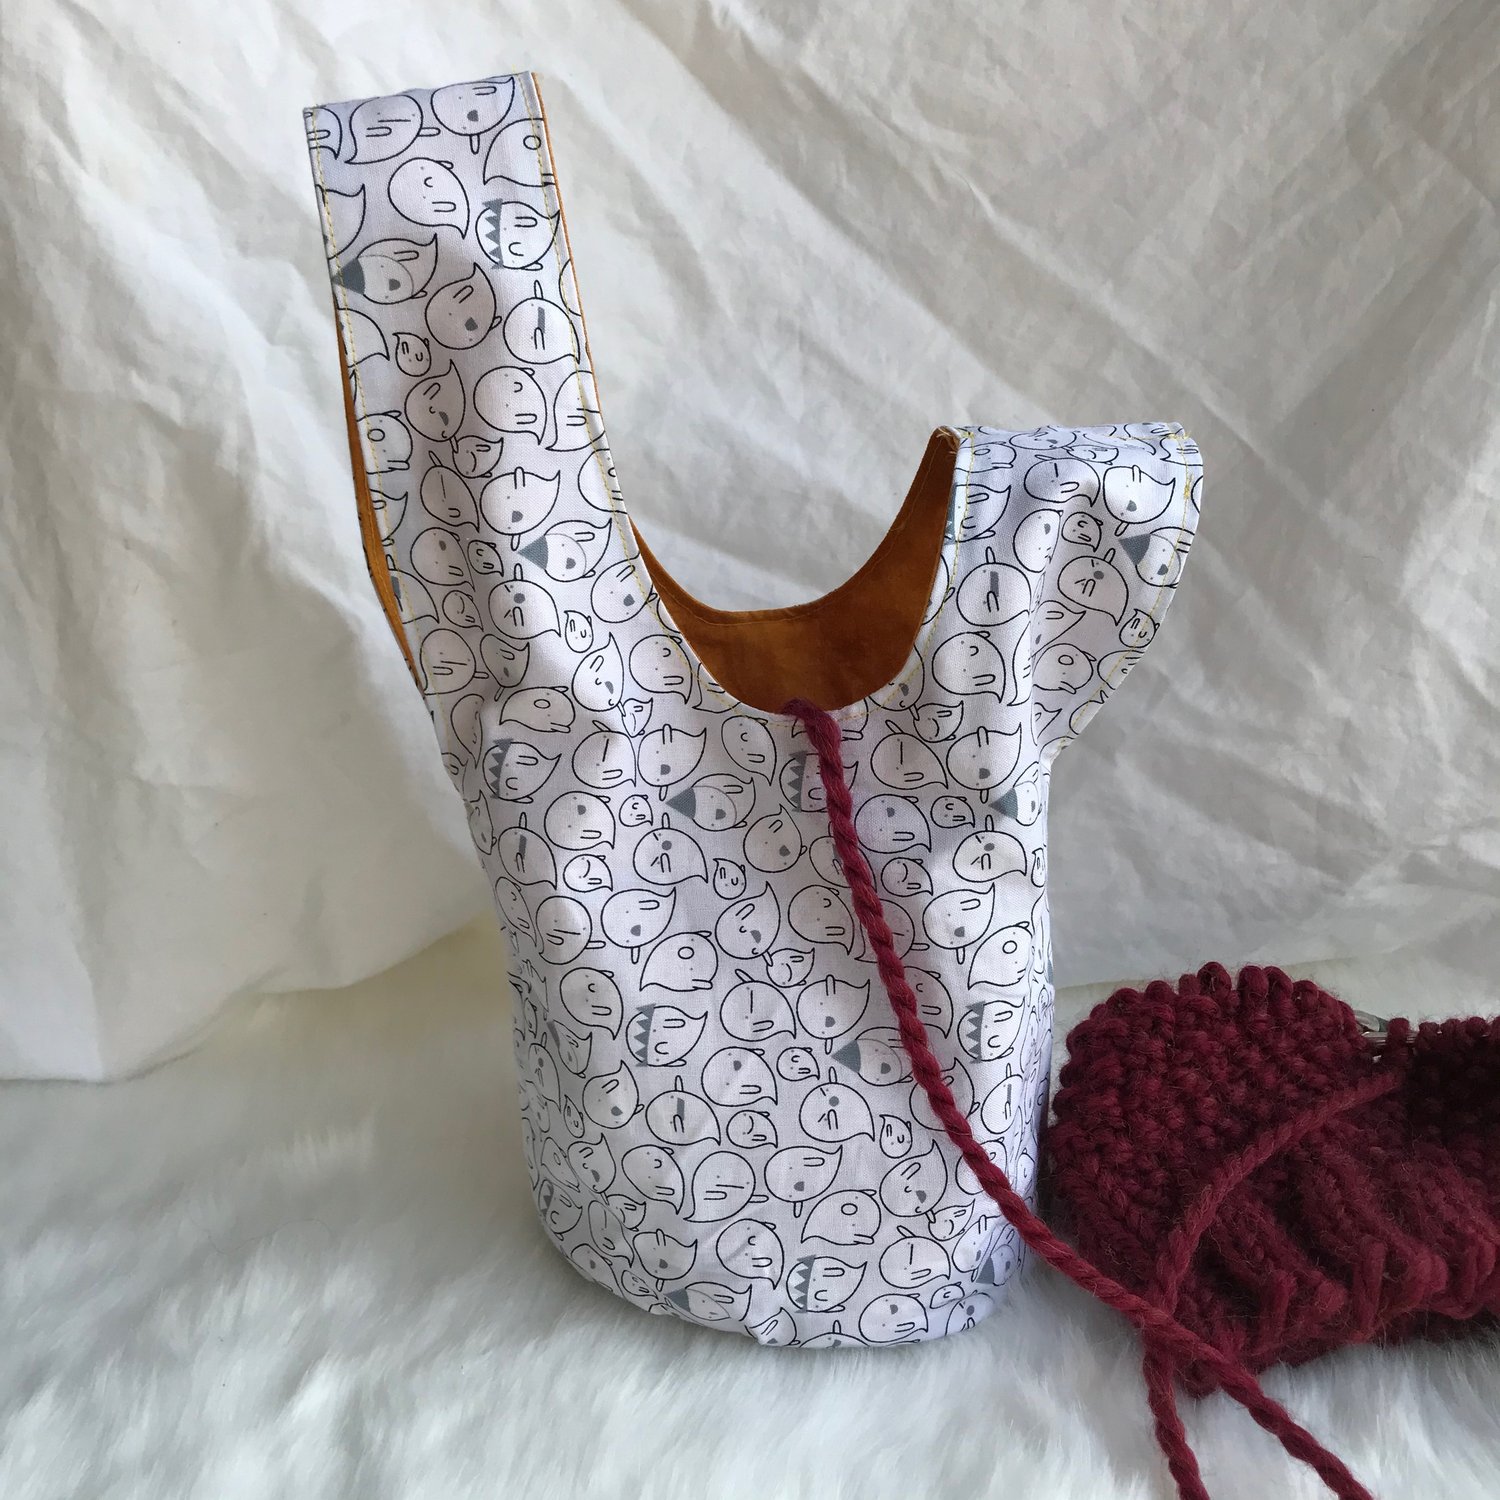 Image of Knitting/Crochet Project Bag - Ghost King